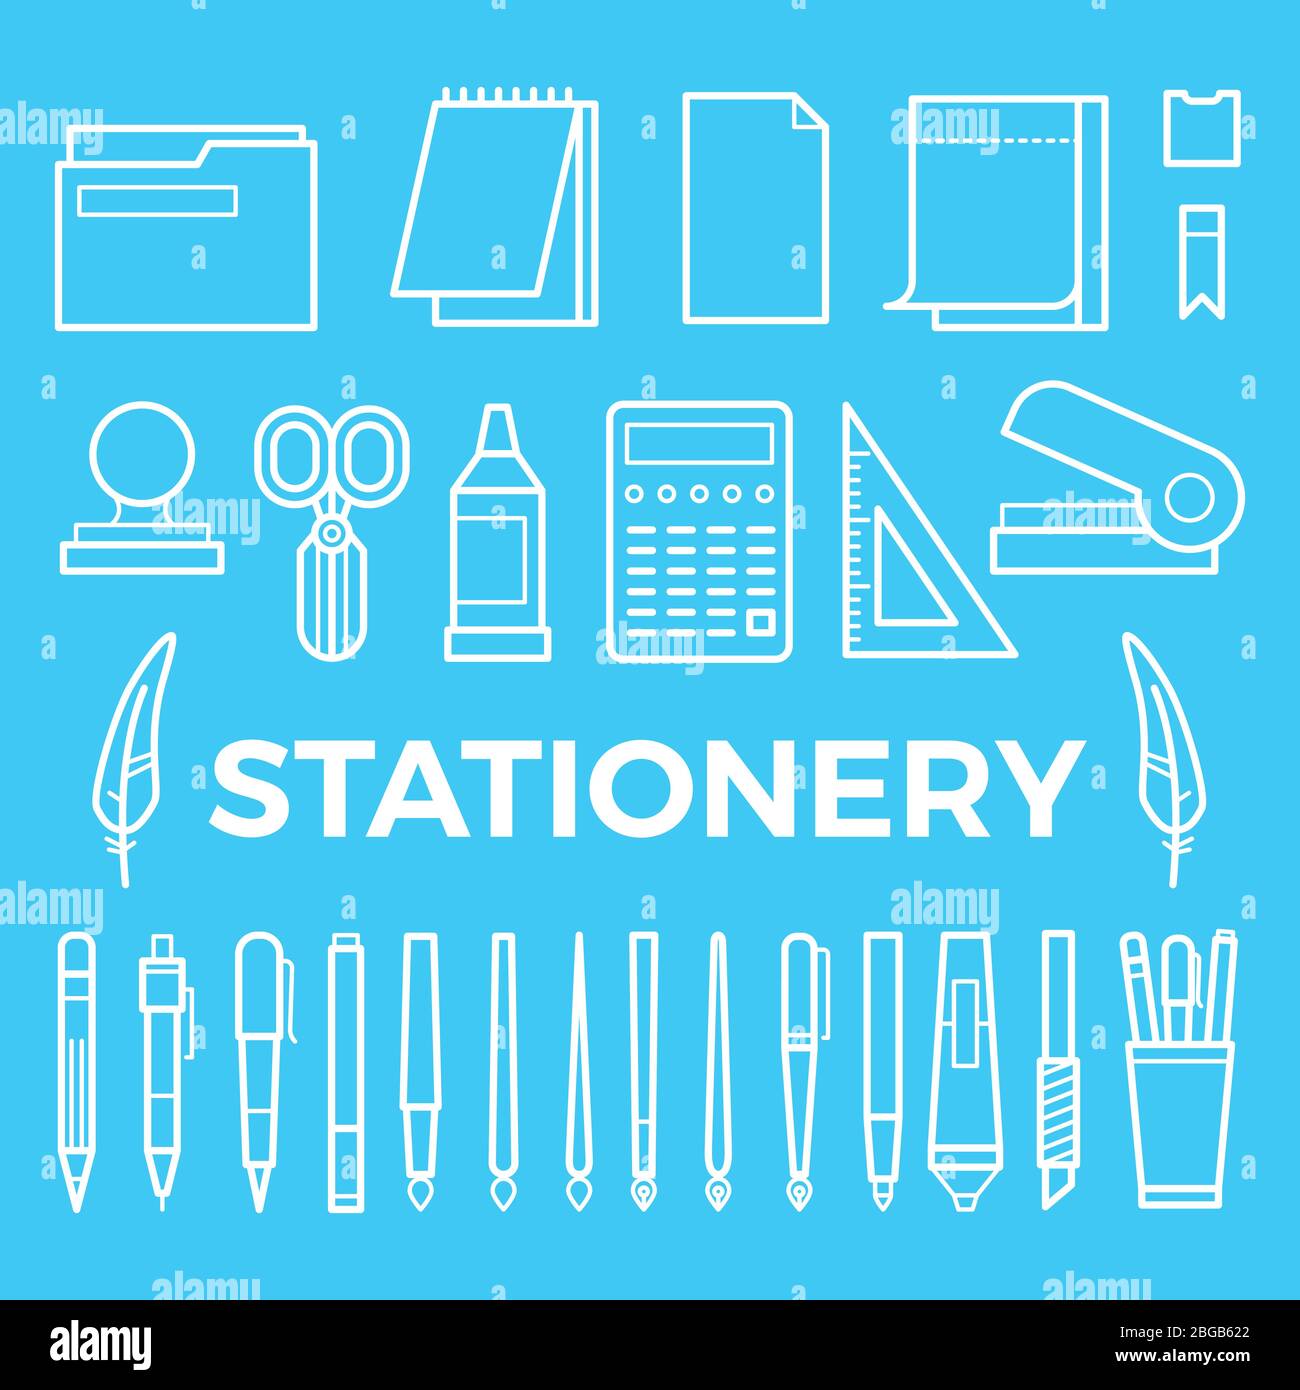 Line style stationery icons collection. Vector office stationery pencil, marker and pen, brush and ballpoint illustration, stapler, paintbrush, Stock Vector